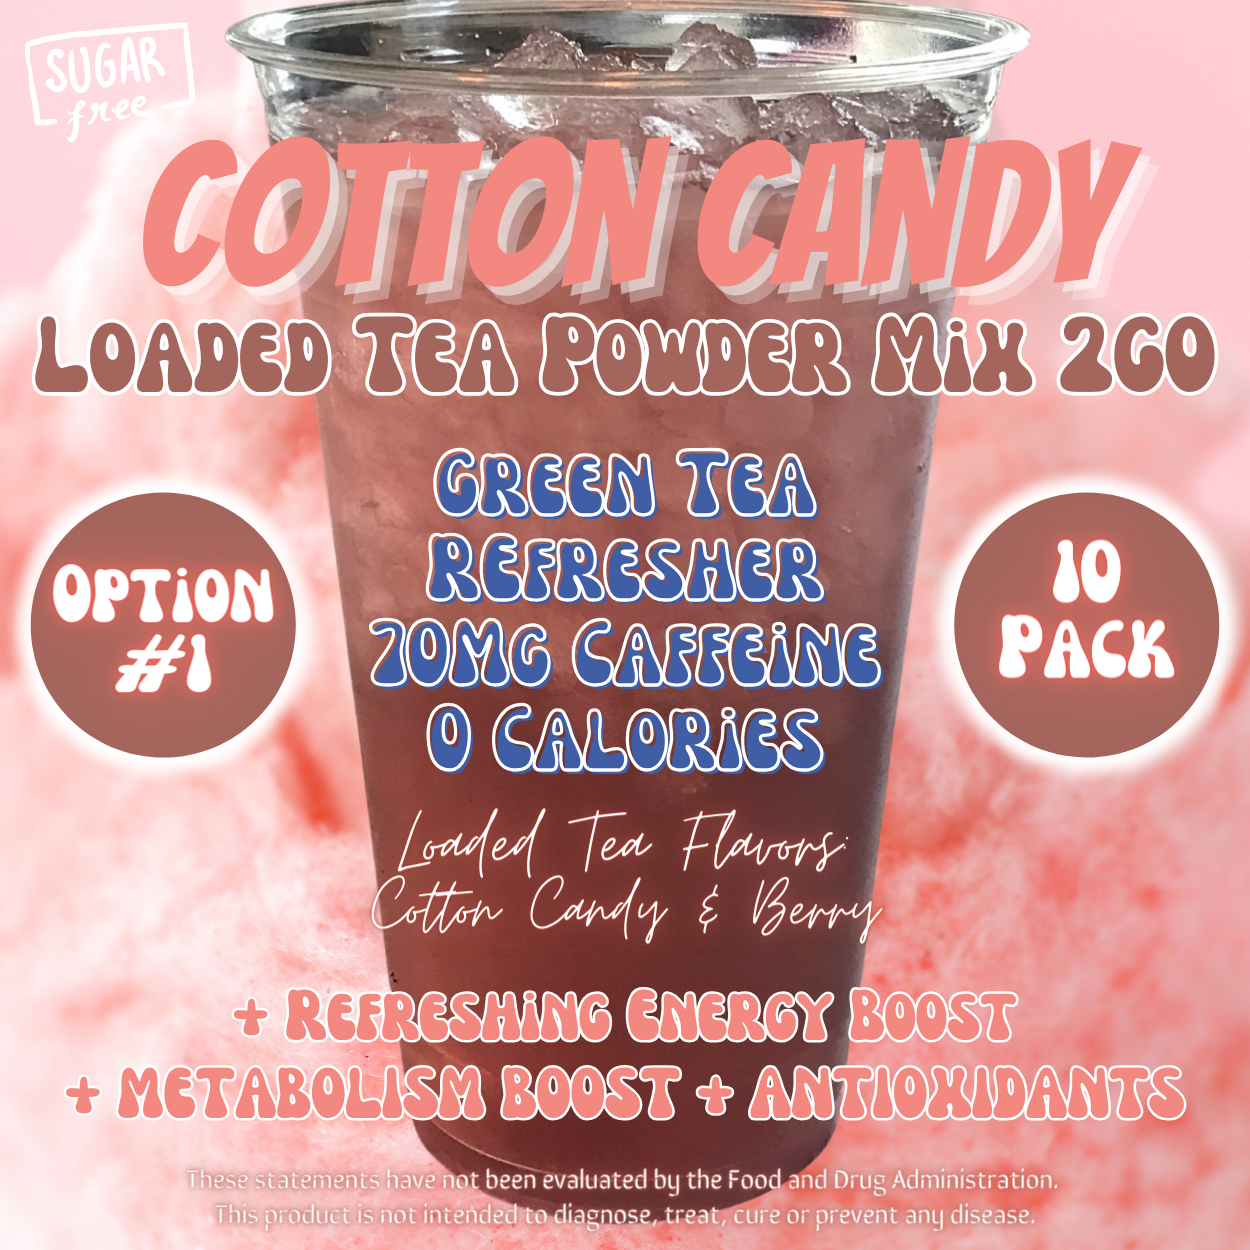 Cotton Candy: Loaded Tea Powder Mix 2GO Packets